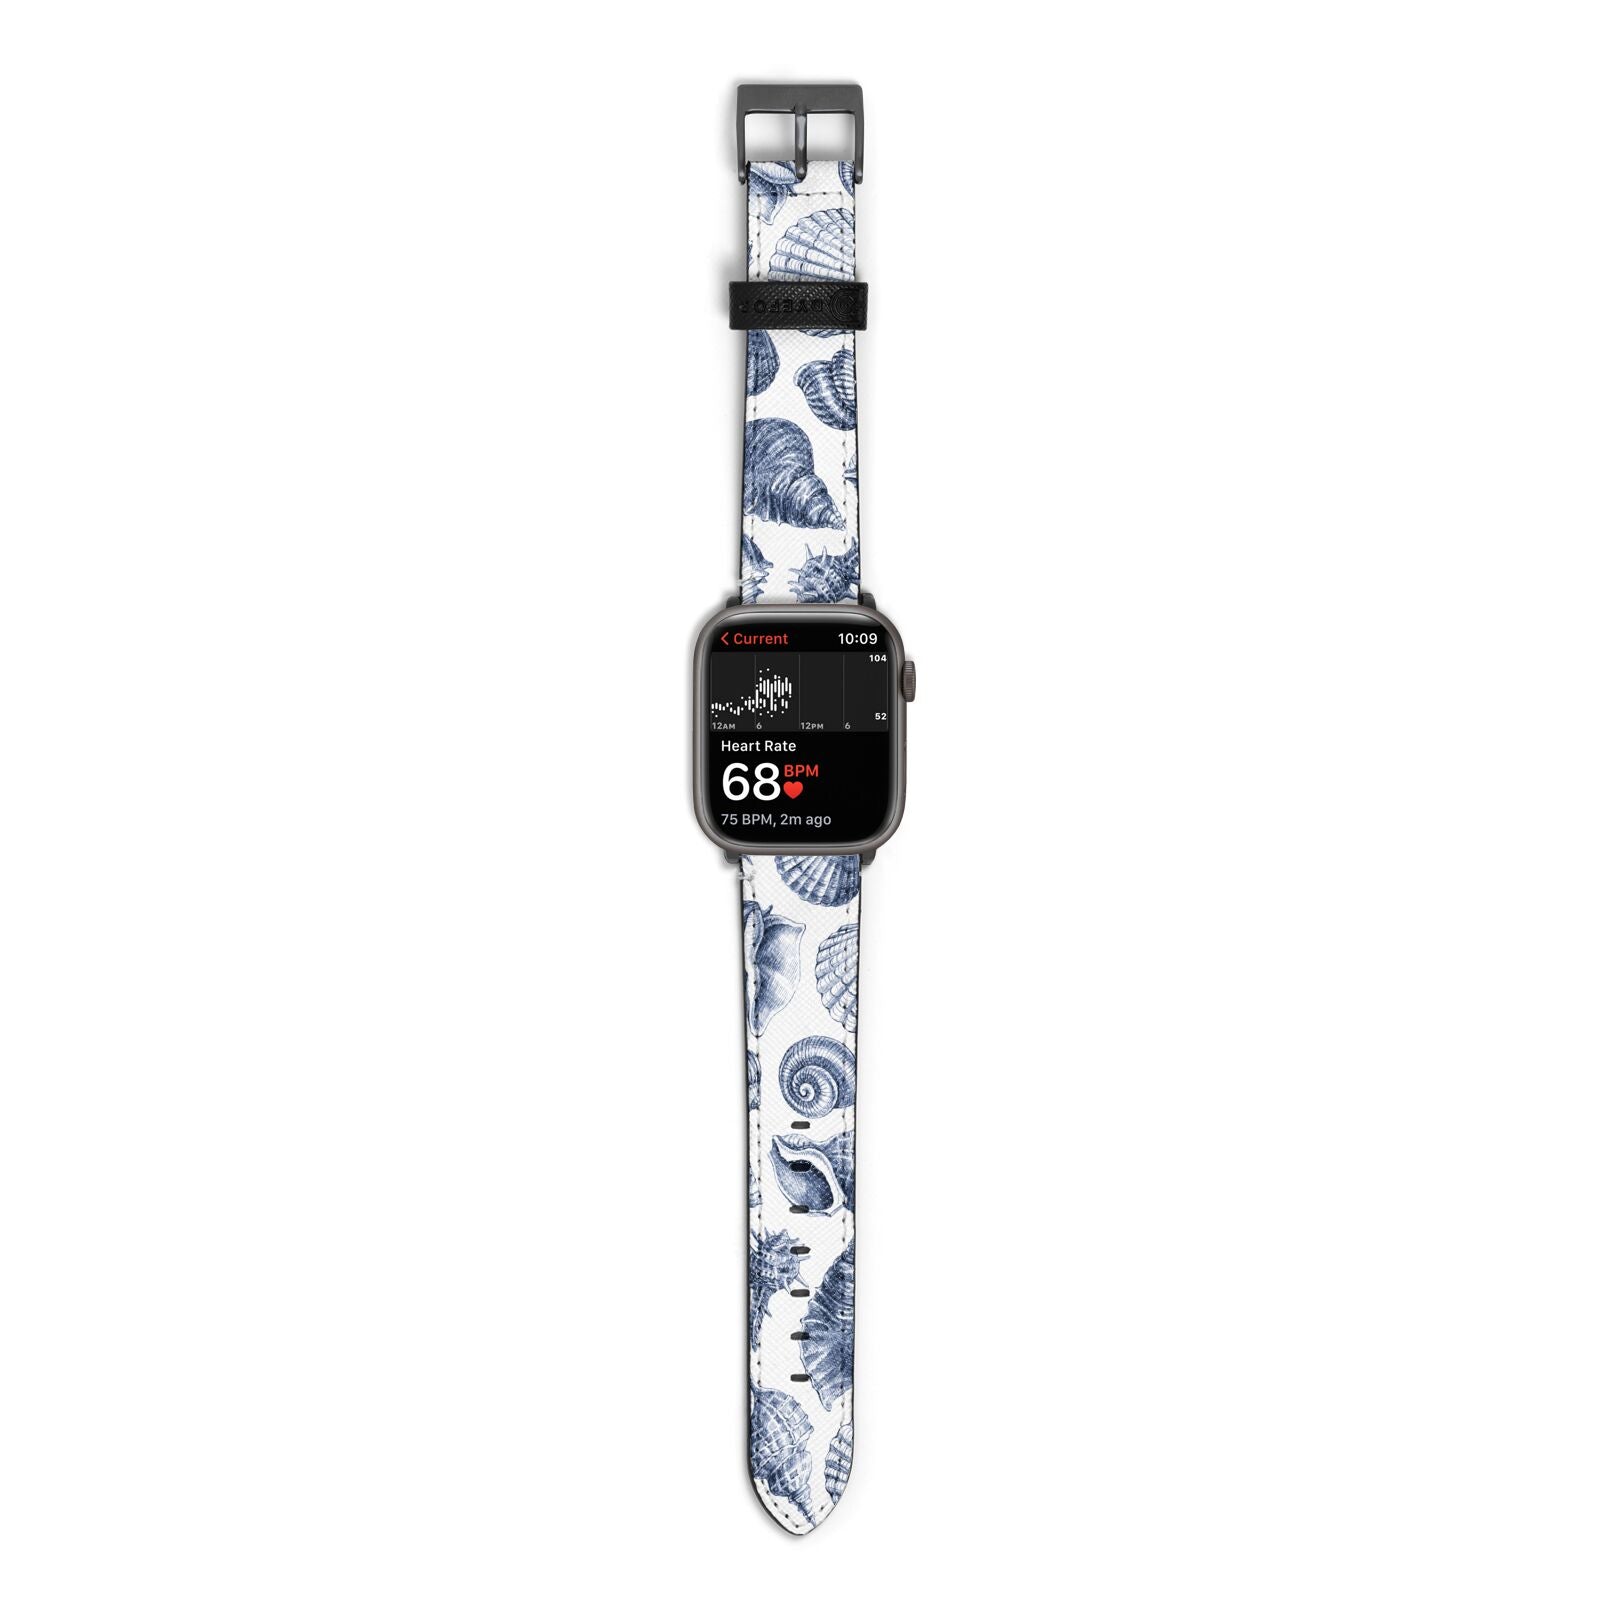 Shell Apple Watch Strap Size 38mm with Space Grey Hardware